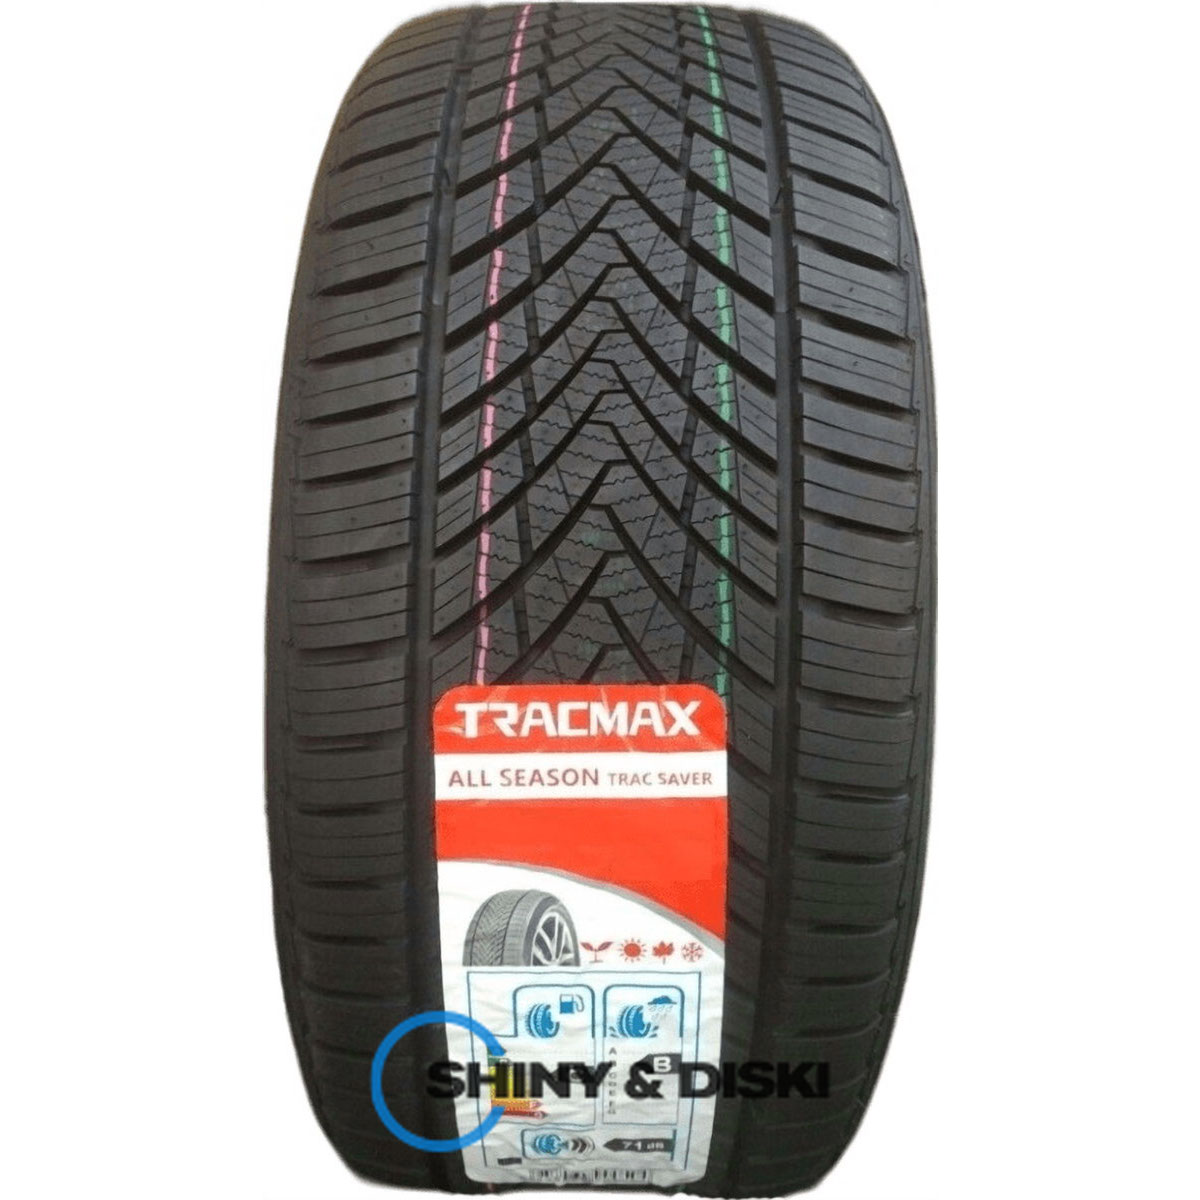 покрышки tracmax a/s trac saver 185/60 r14 82h